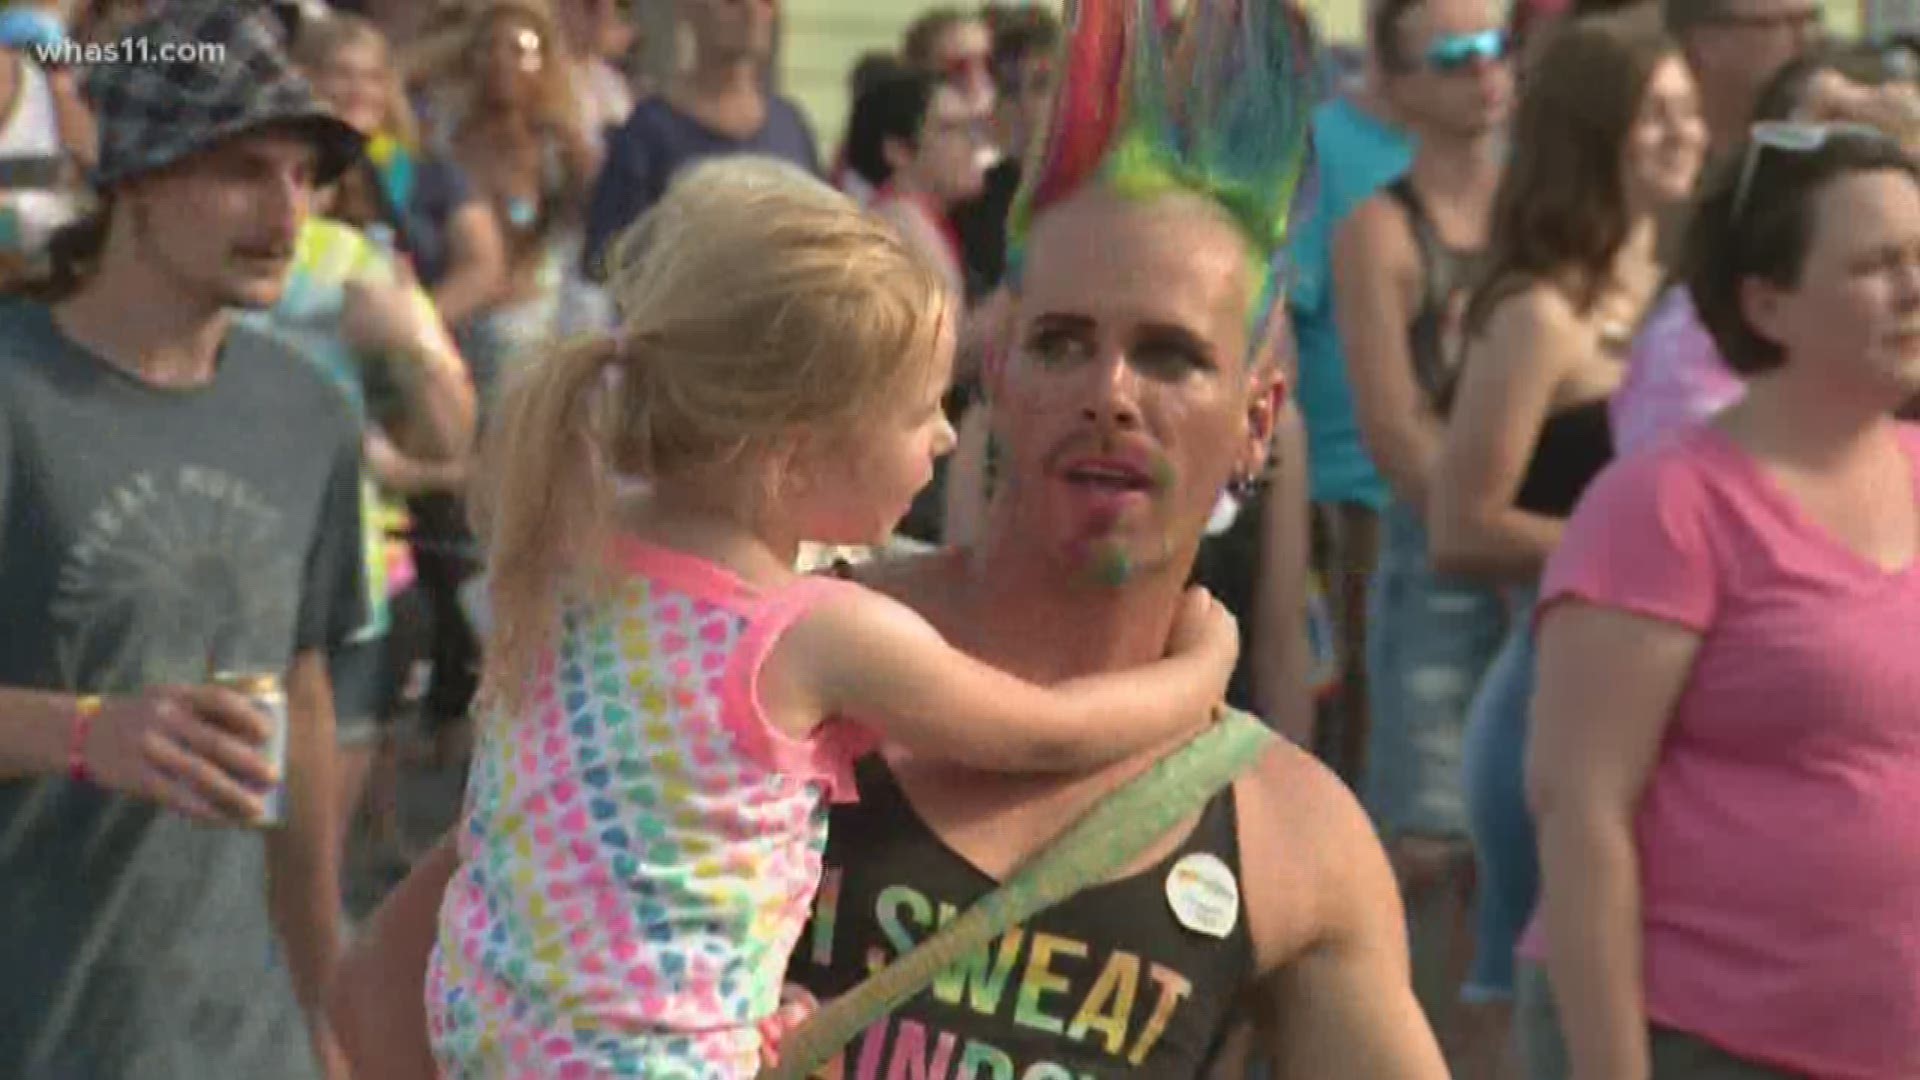 Officials say the Louisville Pride Fest gives people the chance to come together and break down the barriers for the LGBTQ community.